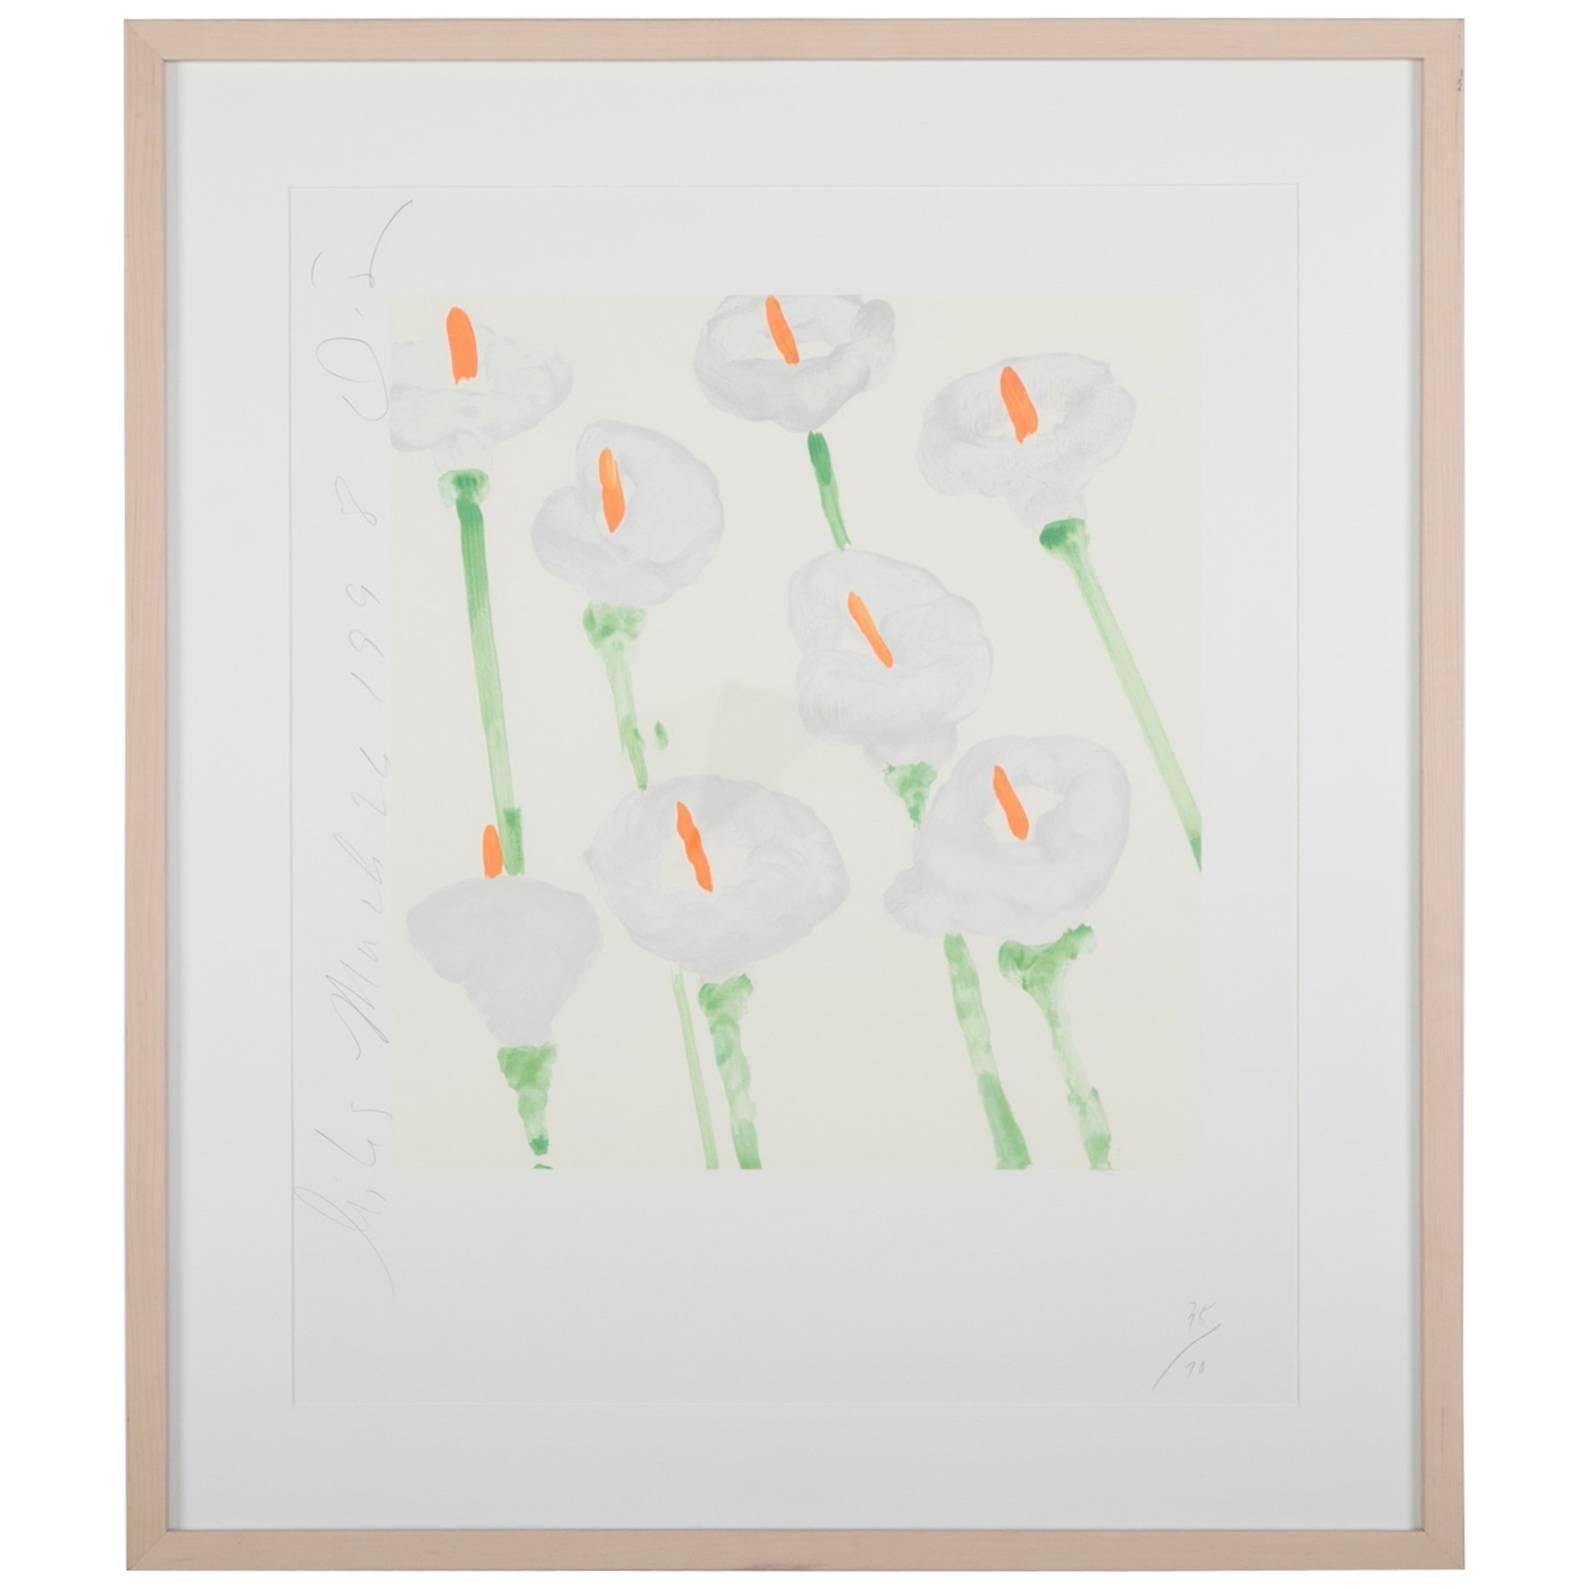 "Lilies" Signed and Dated Serigraph by Donald Sultan